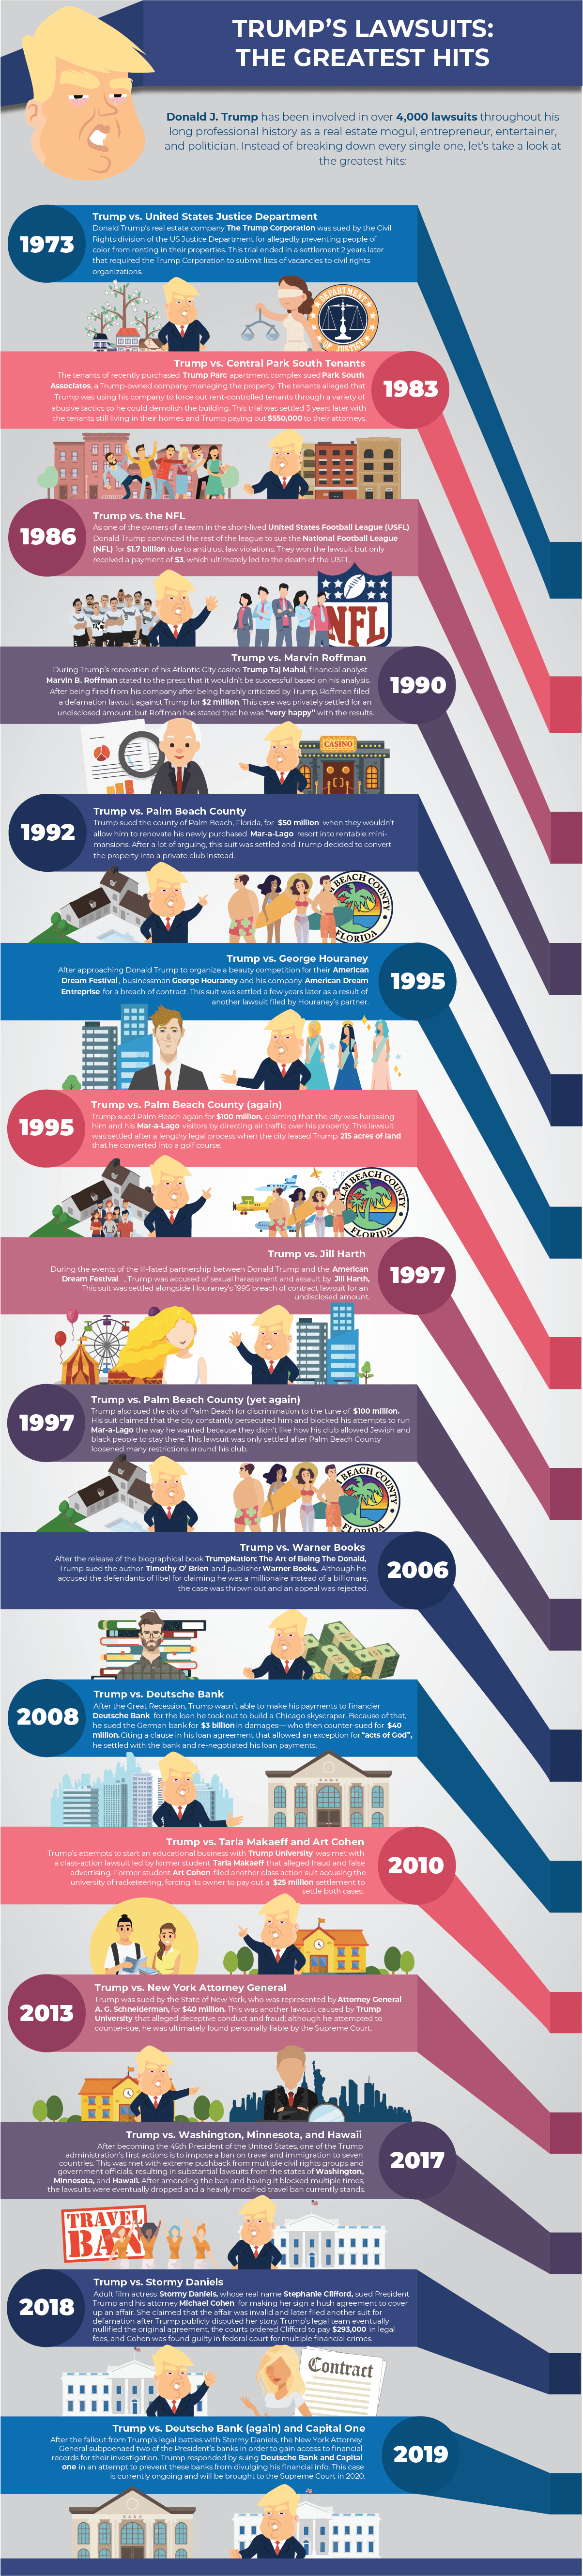 Trump Lawsuits - An Illustrated History of Over 4000 Lawsuits